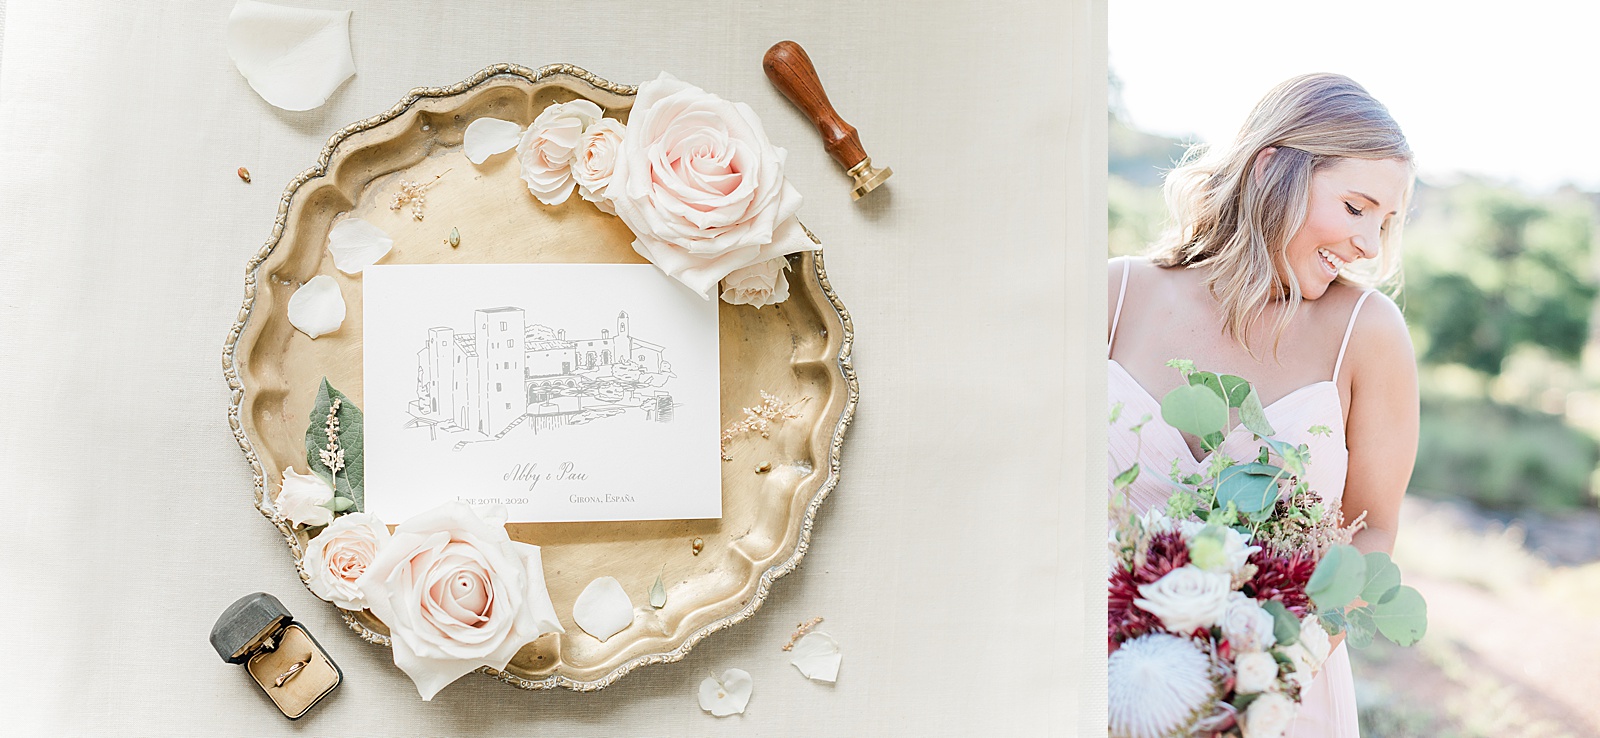 Wedding Inspiration with roses and gold